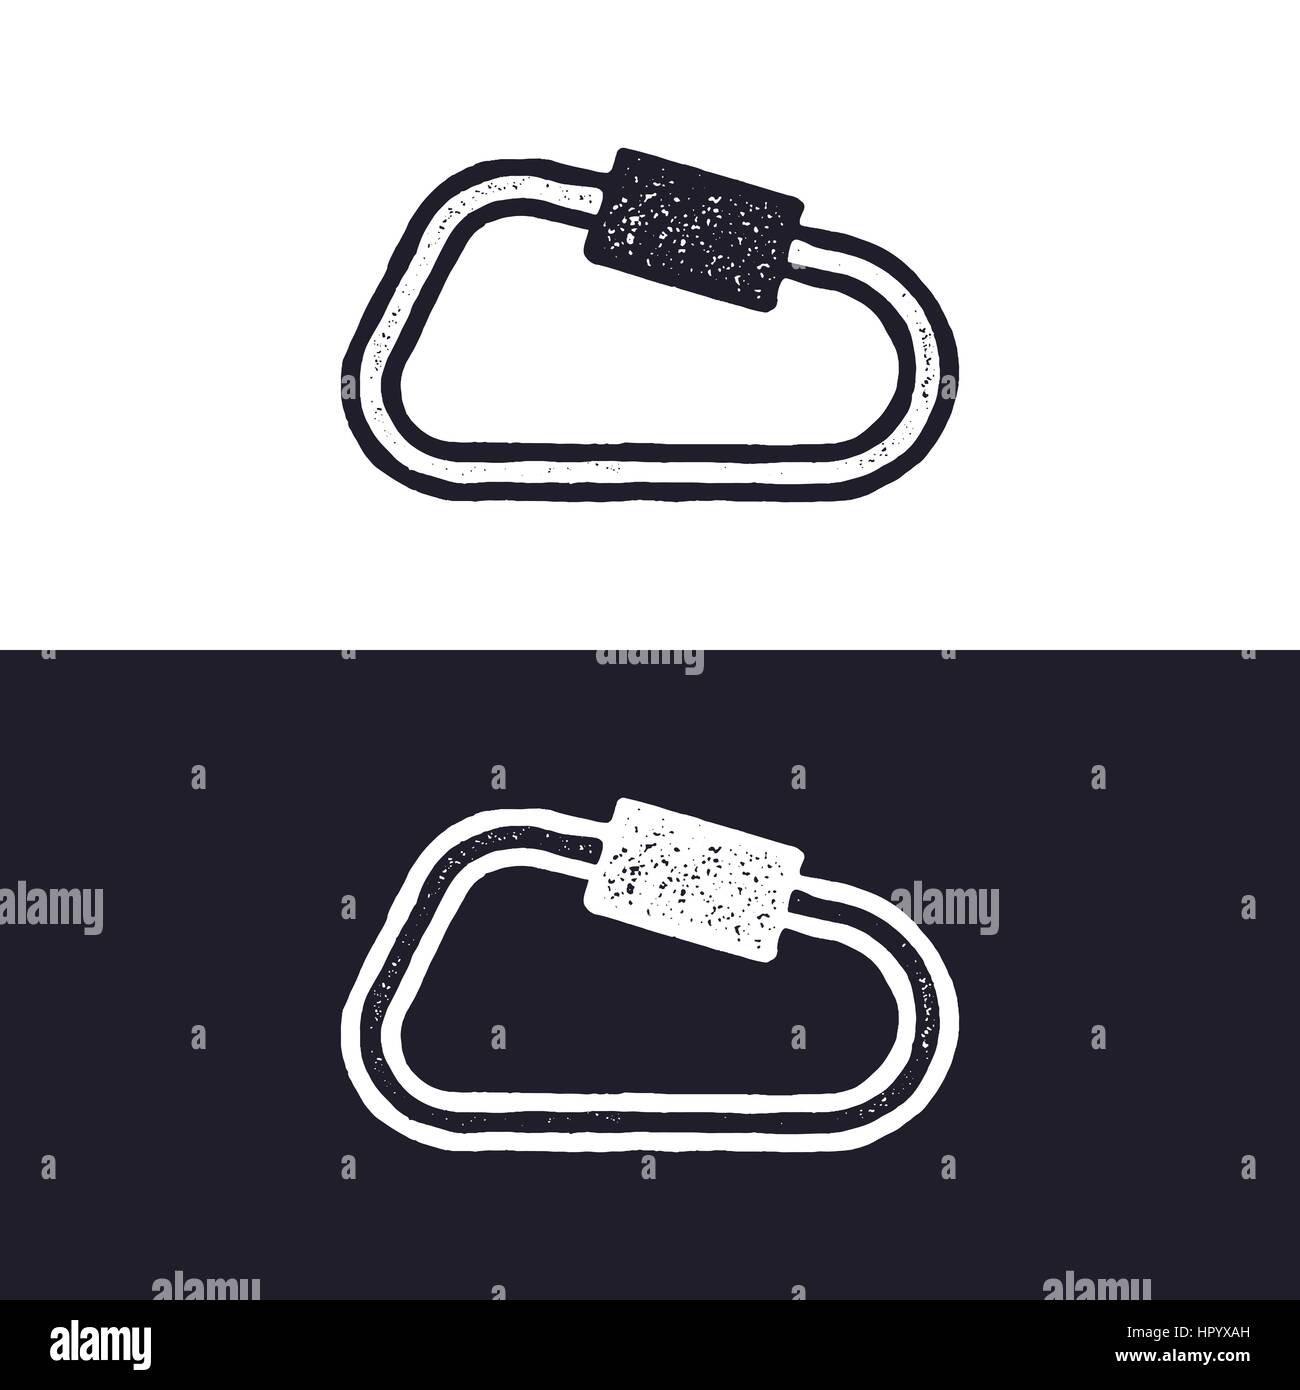 carabiner icon isolated on white background. Letterpress effect. Vector adventure pictogram. Isolated on white and dark backgrounds Stock Vector